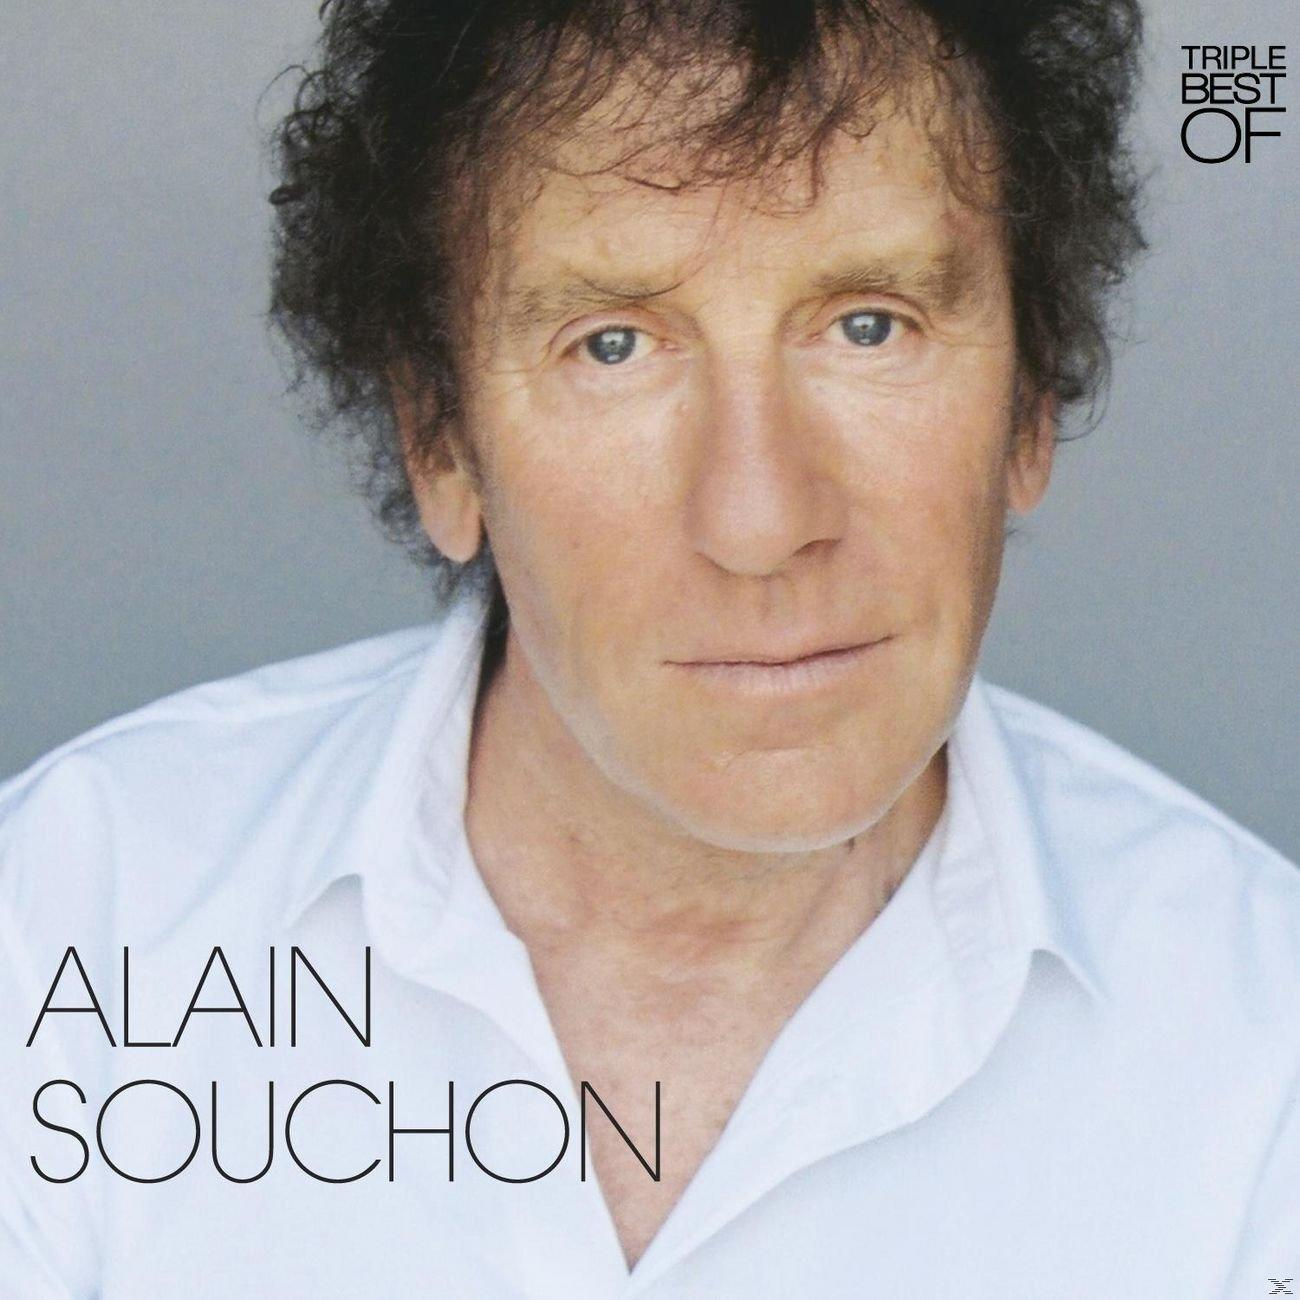 Alain Souchon - Best-Of (New (CD) - 3cd Collection) Digipack